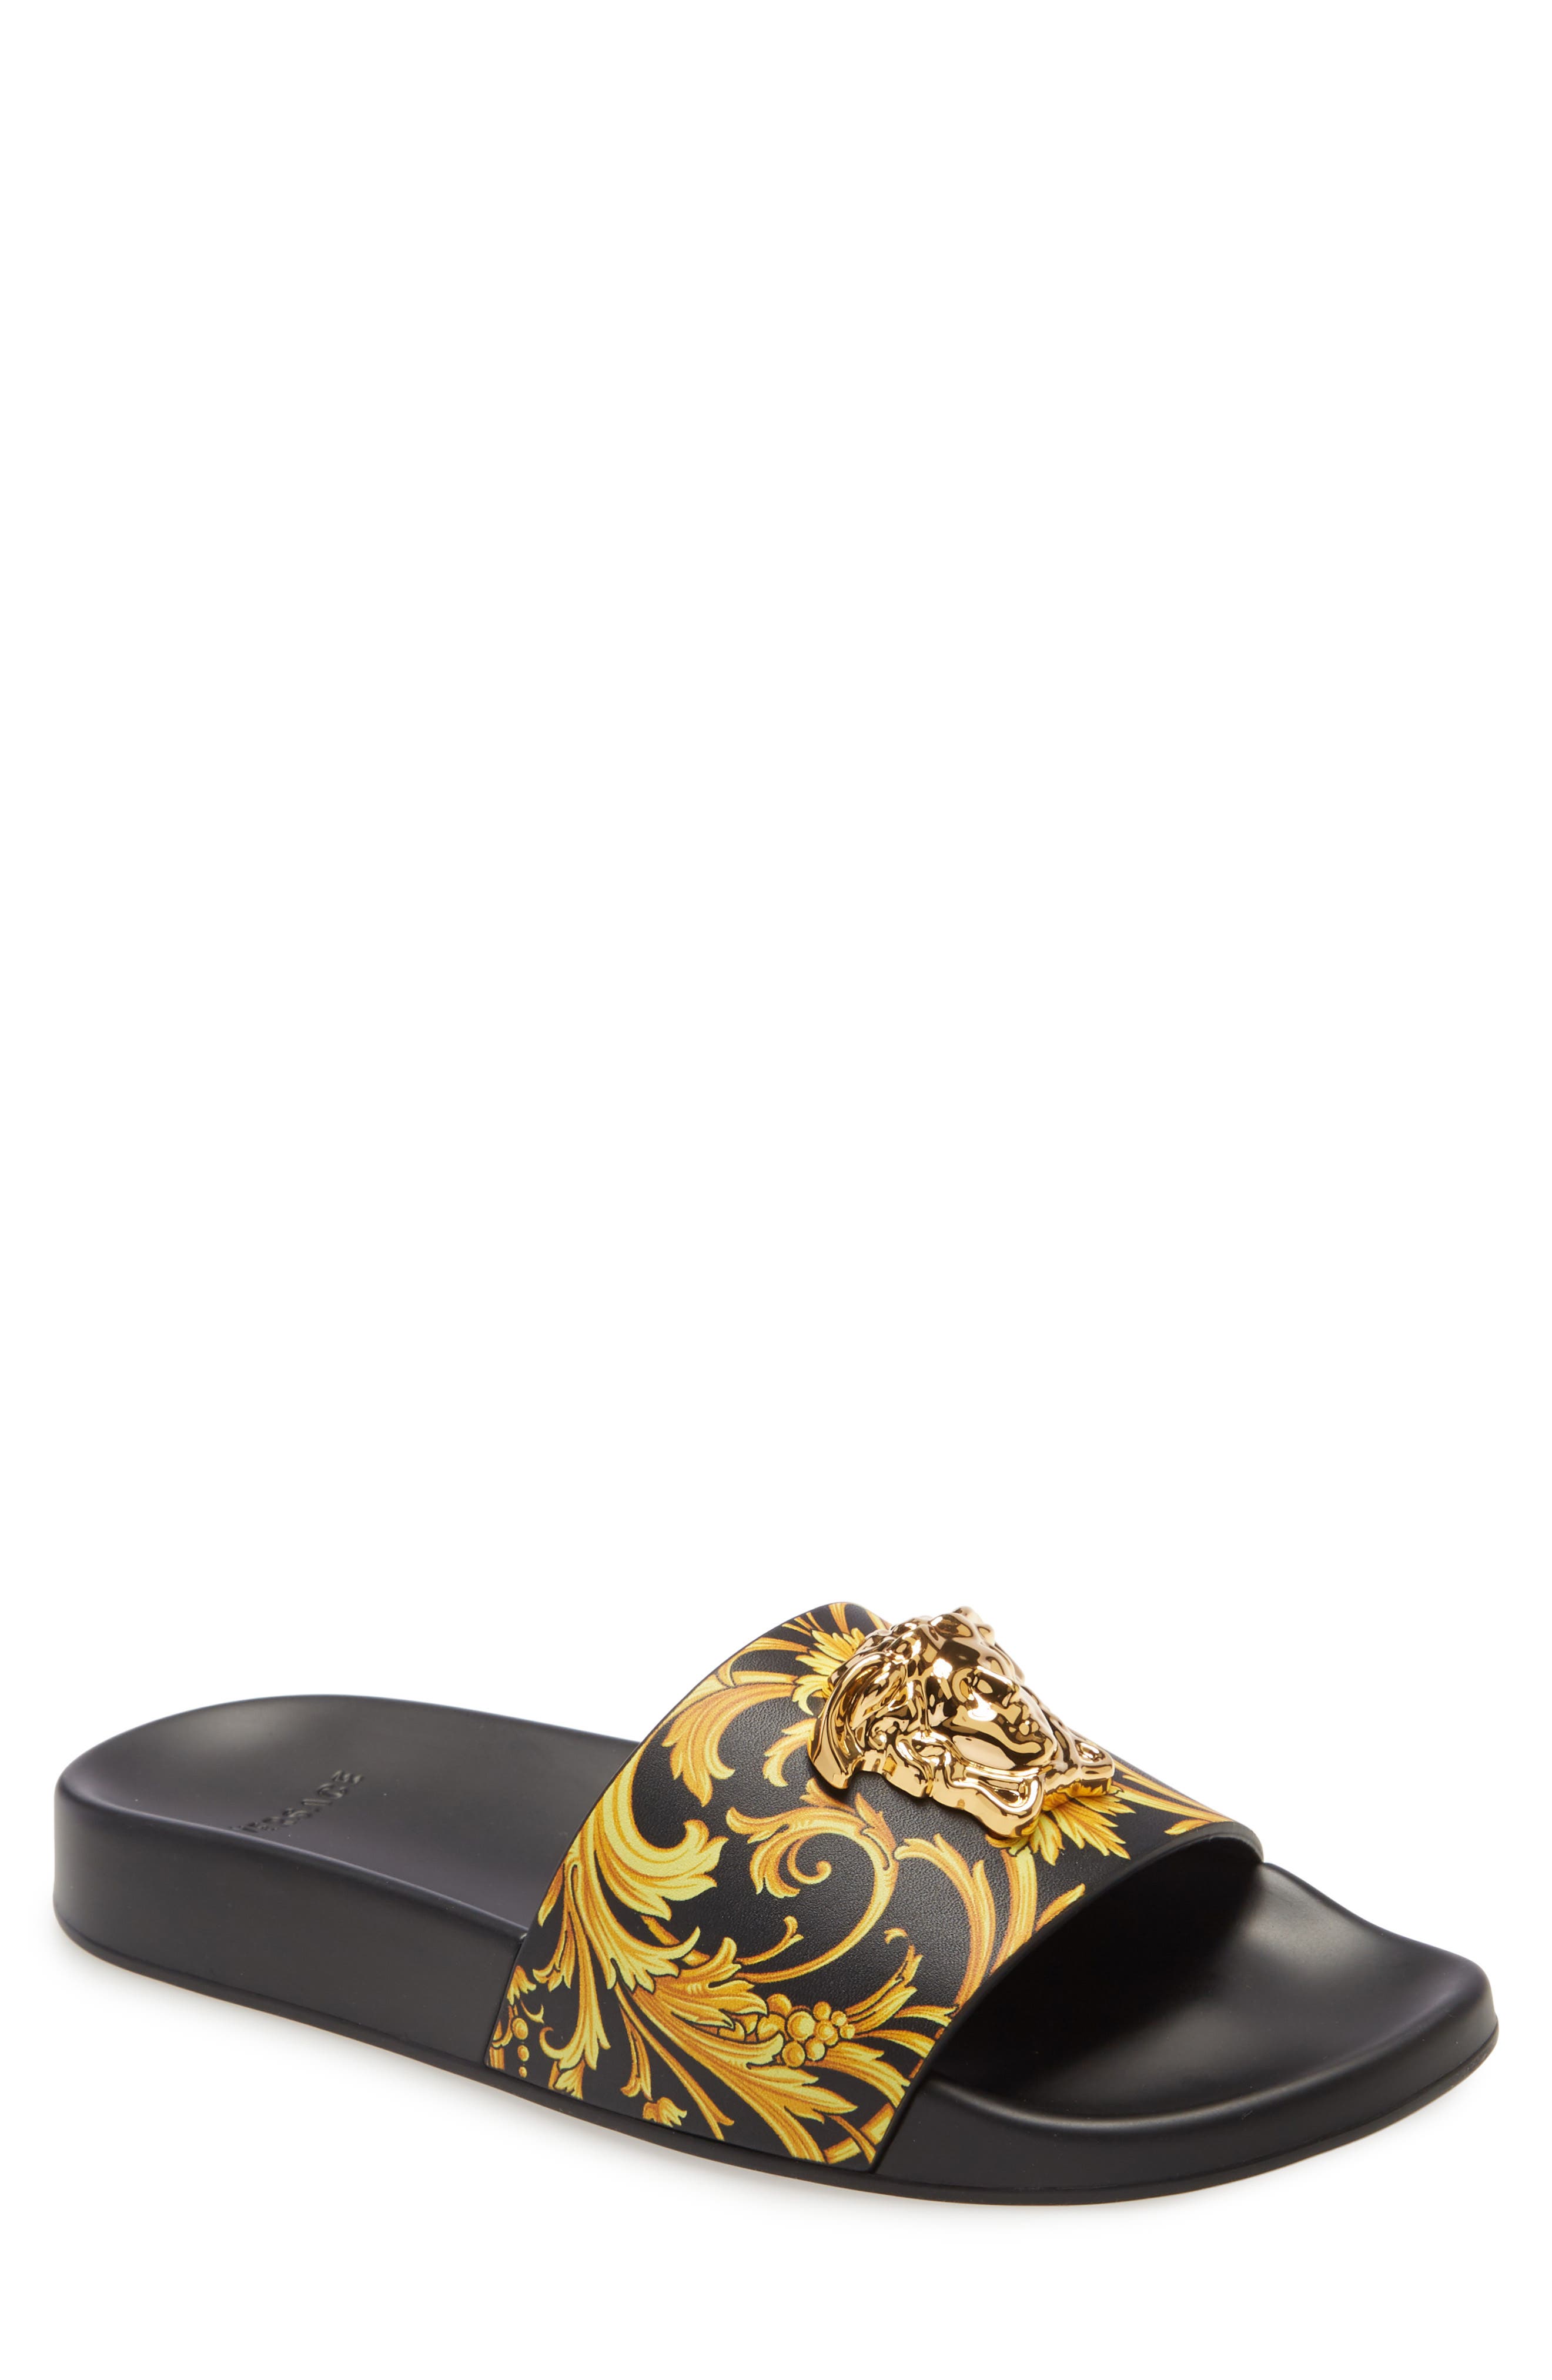 versace slides white and gold